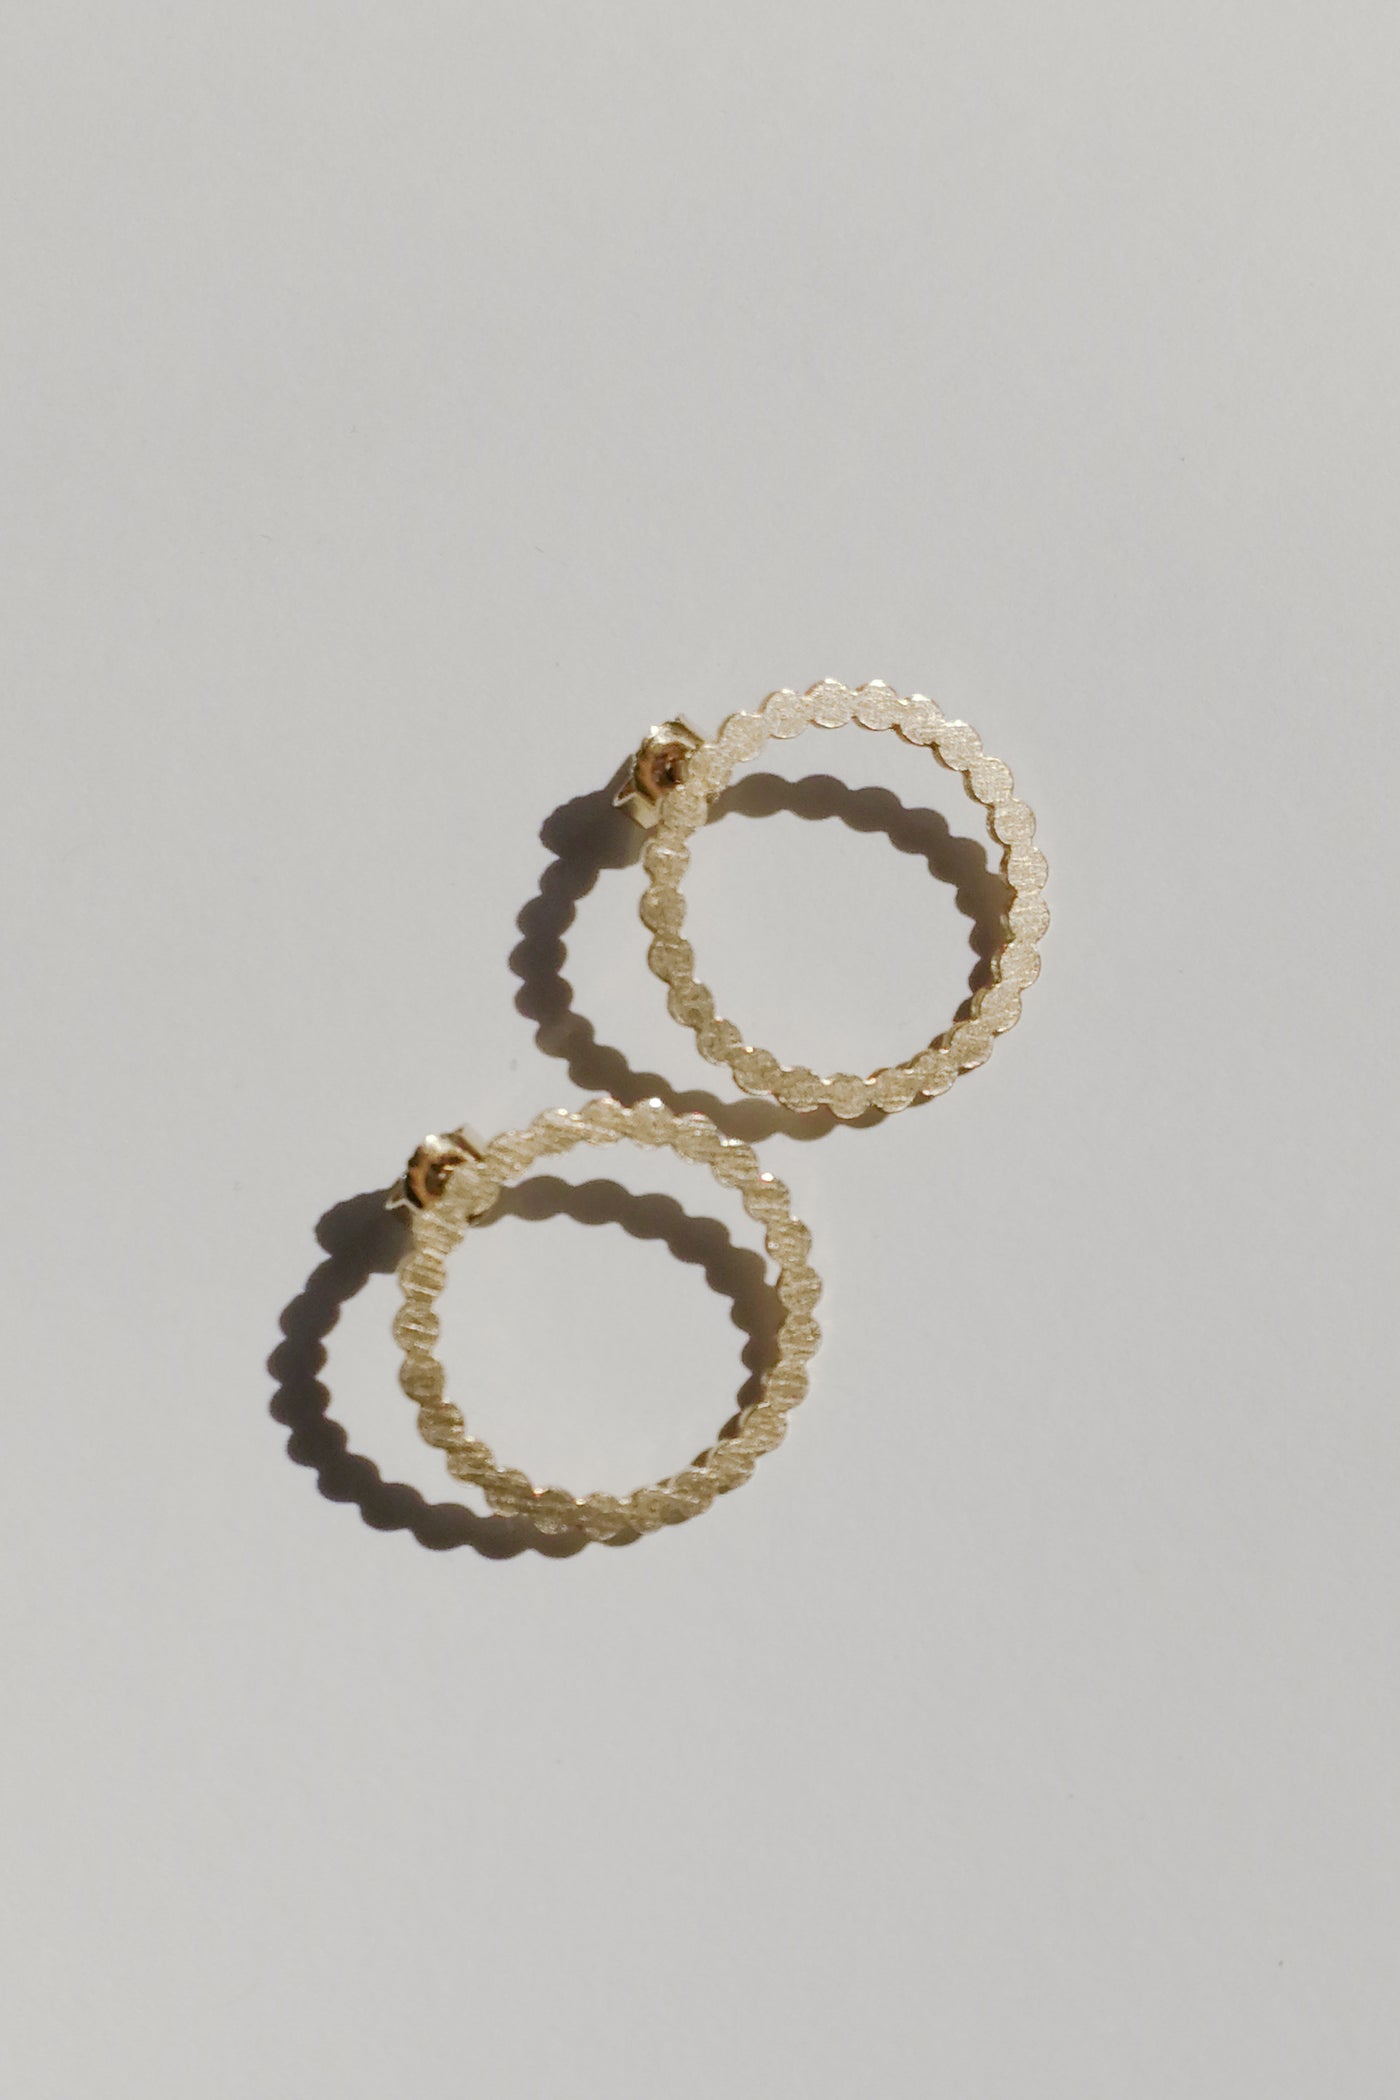 Point earrings no2, gold-plated